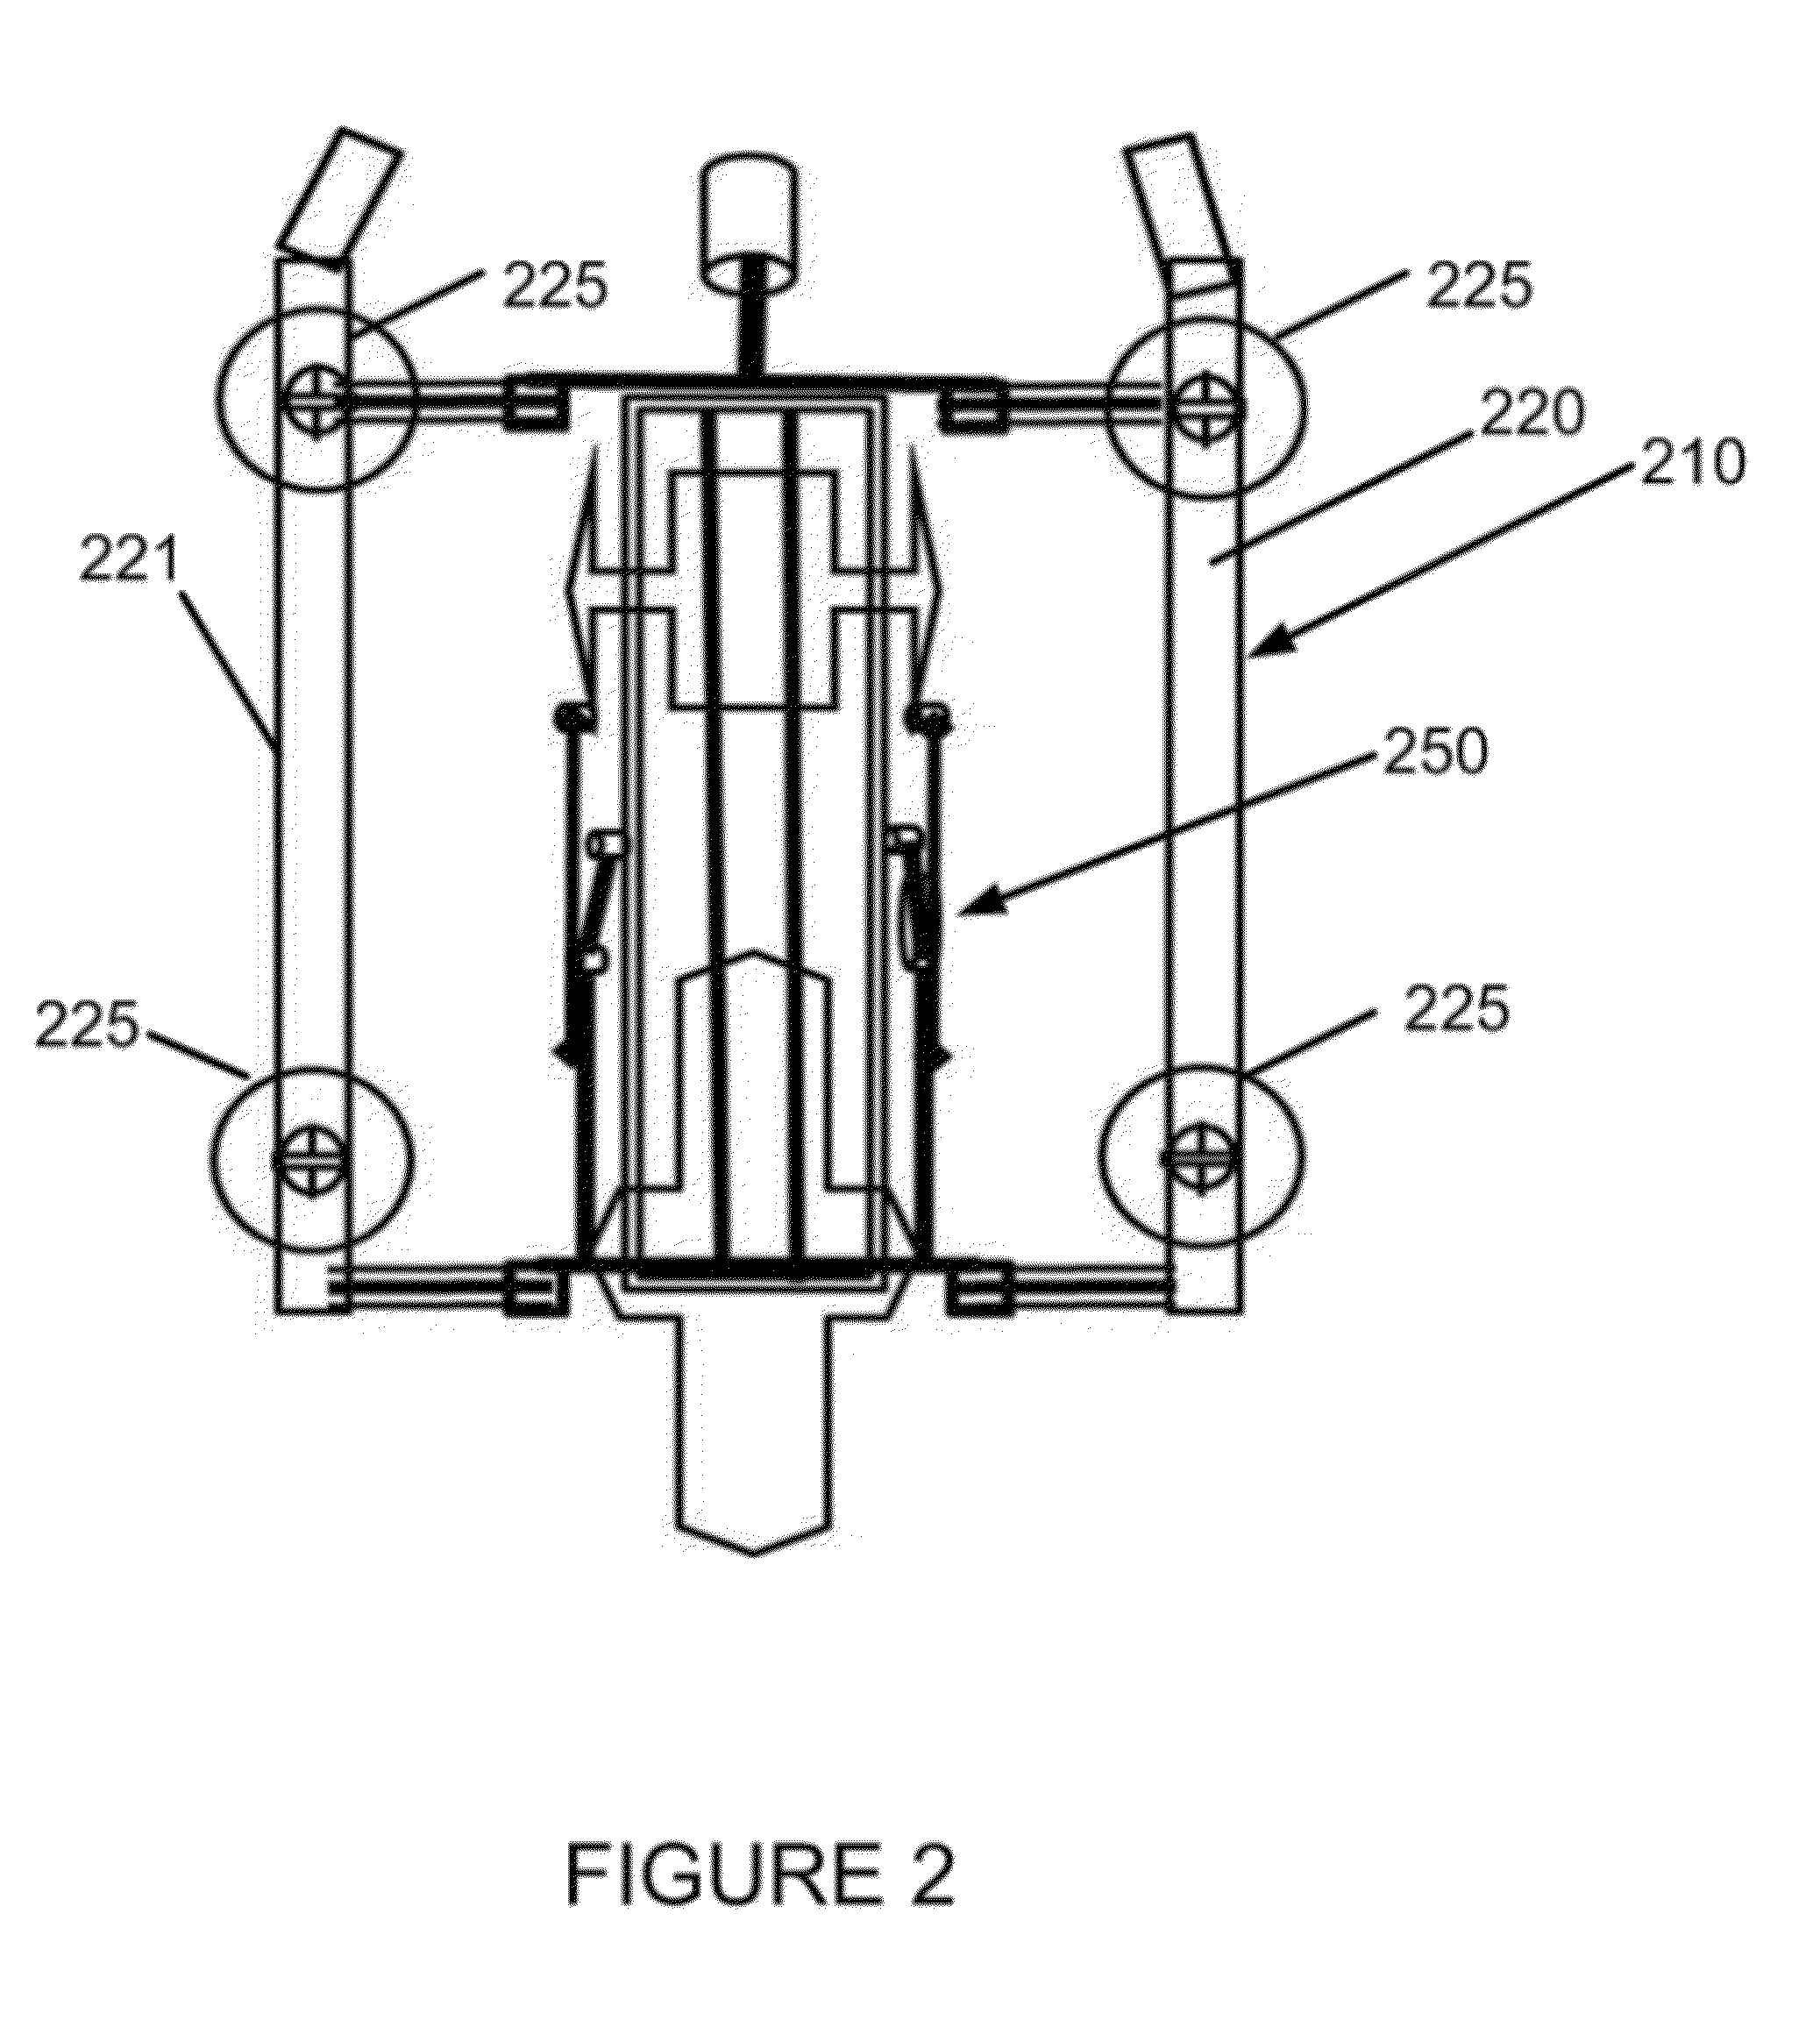 Method and Apparatus for Application of Mortar